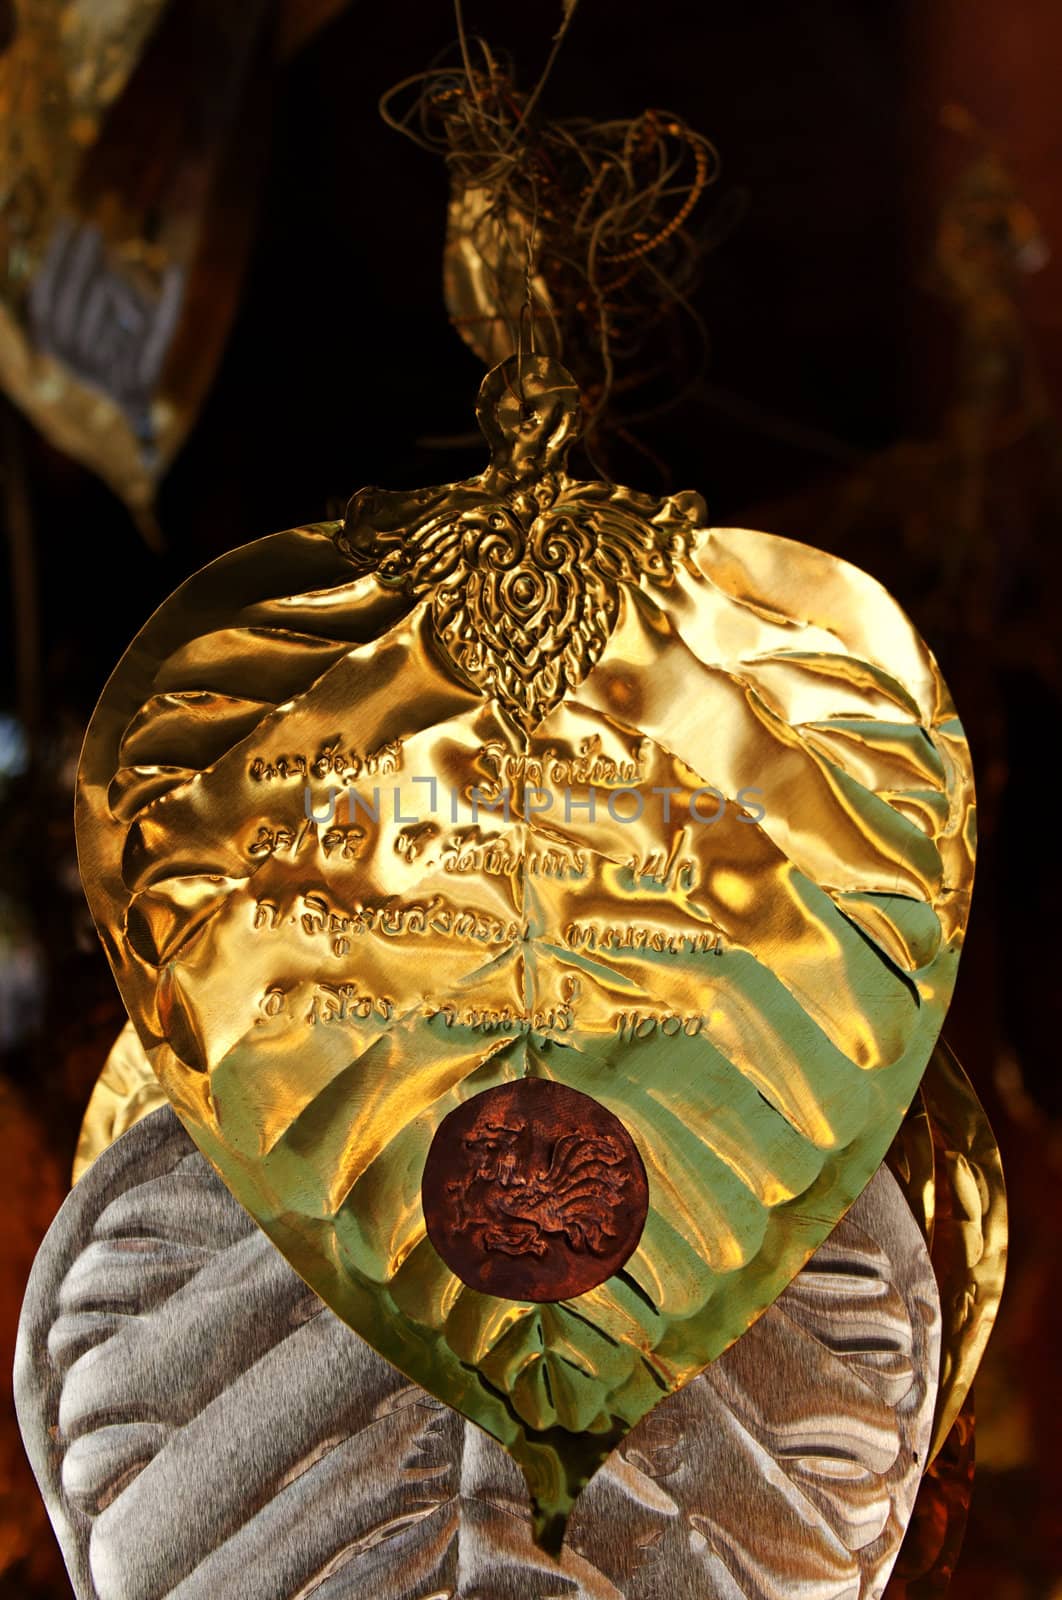  Golden Leaf with inscription in a temple in Thaialand